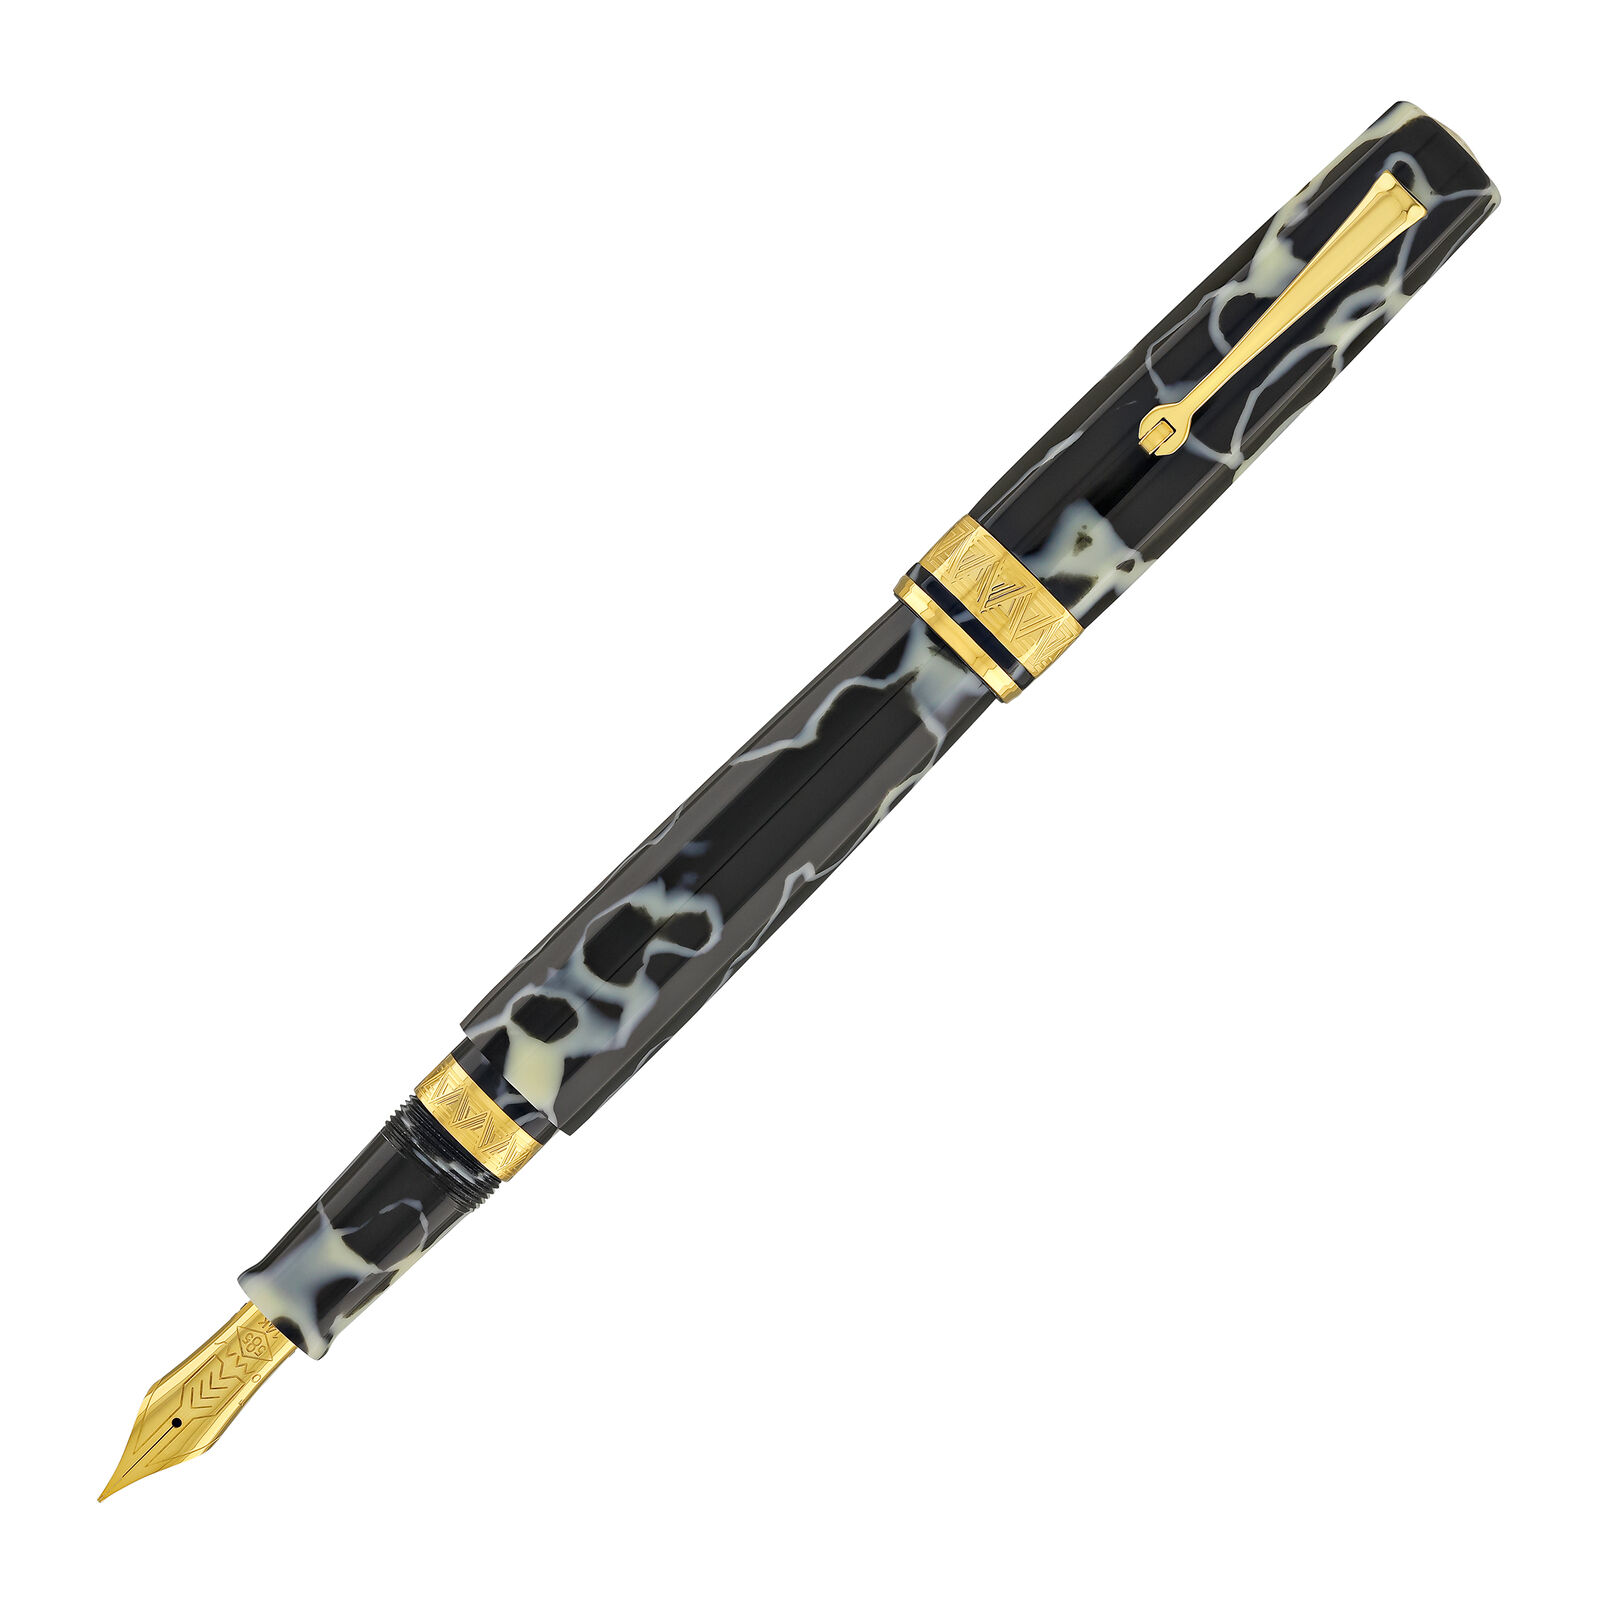 Omas Paragon Fountain Pen in Wild with Gold Trim - Medium Point - NEW in Box